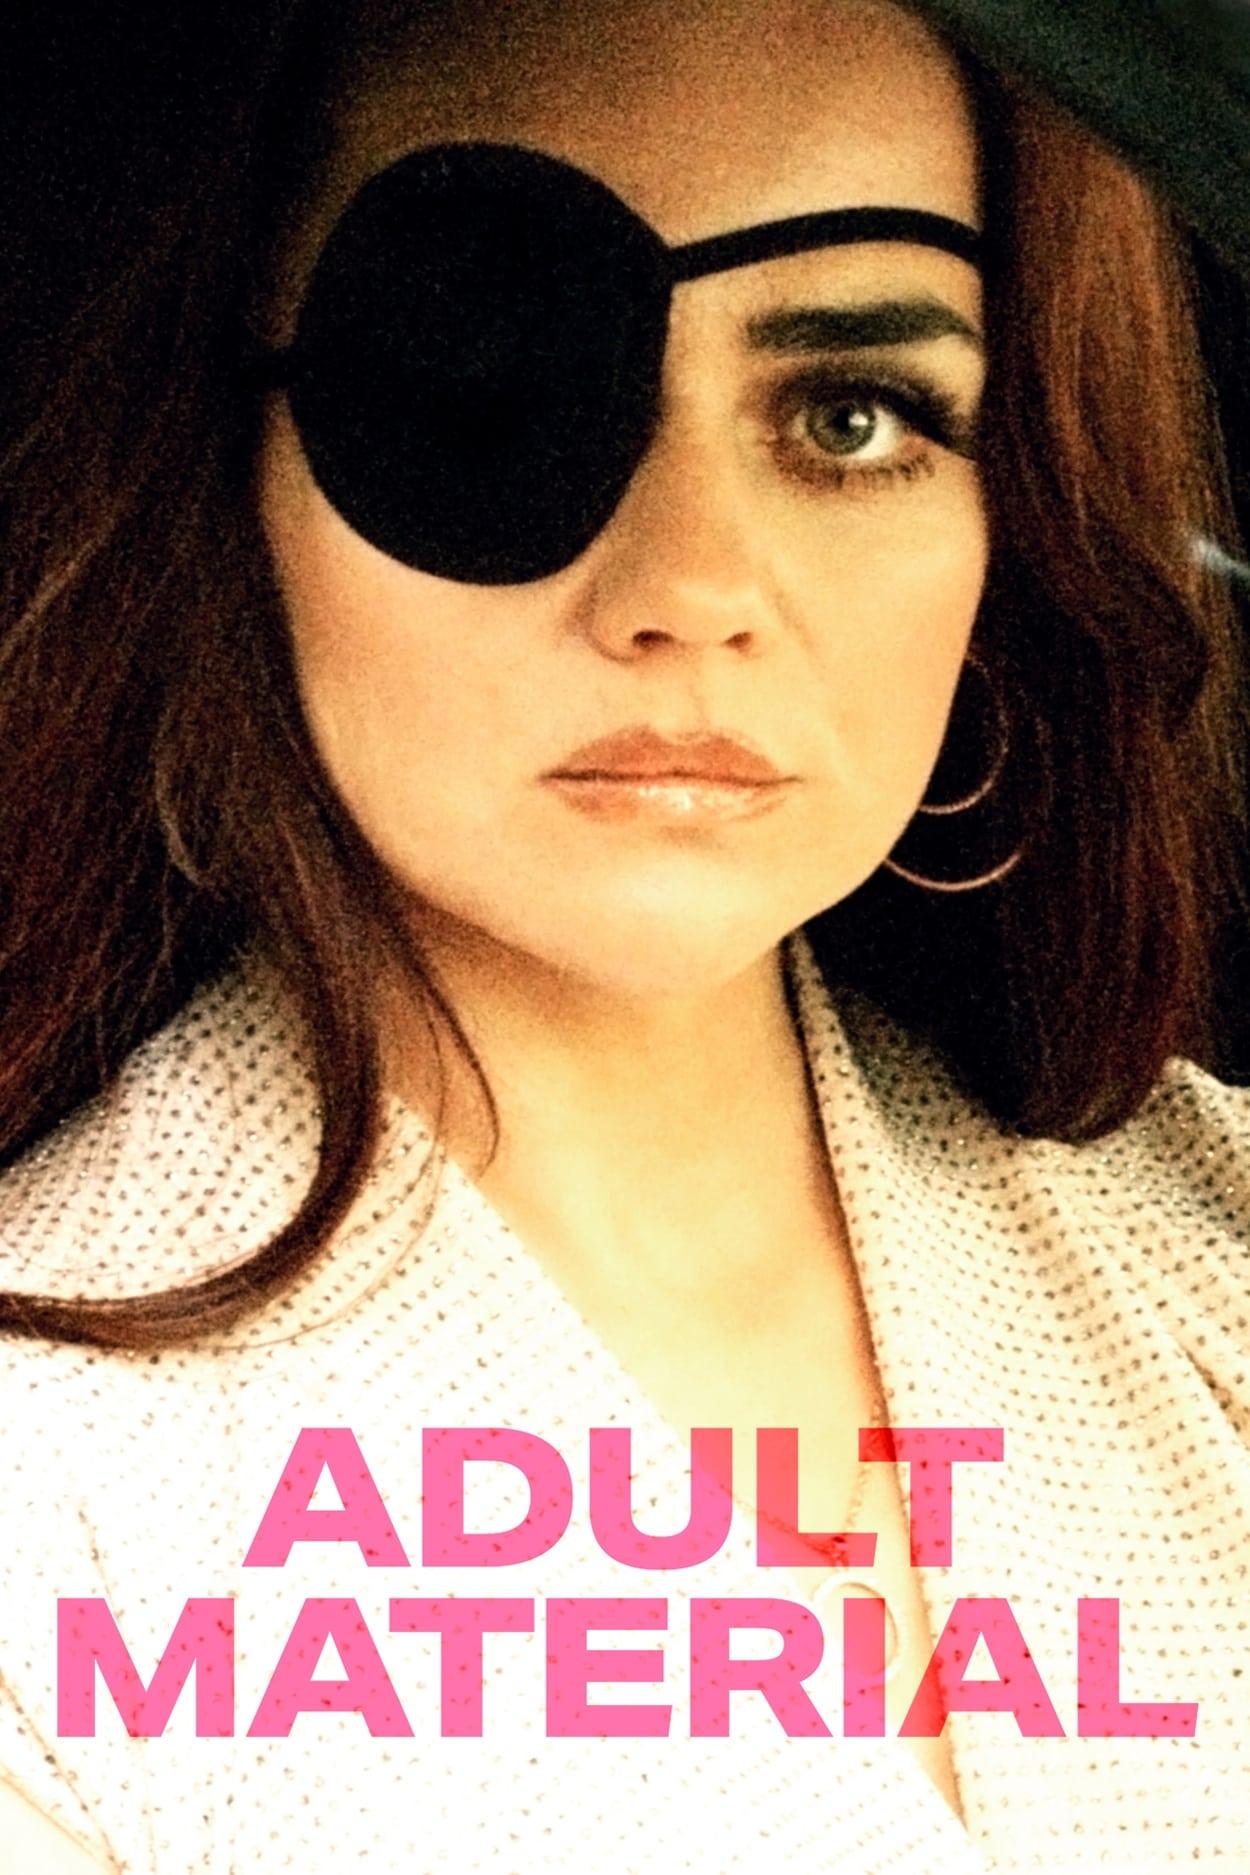 Adult Material poster